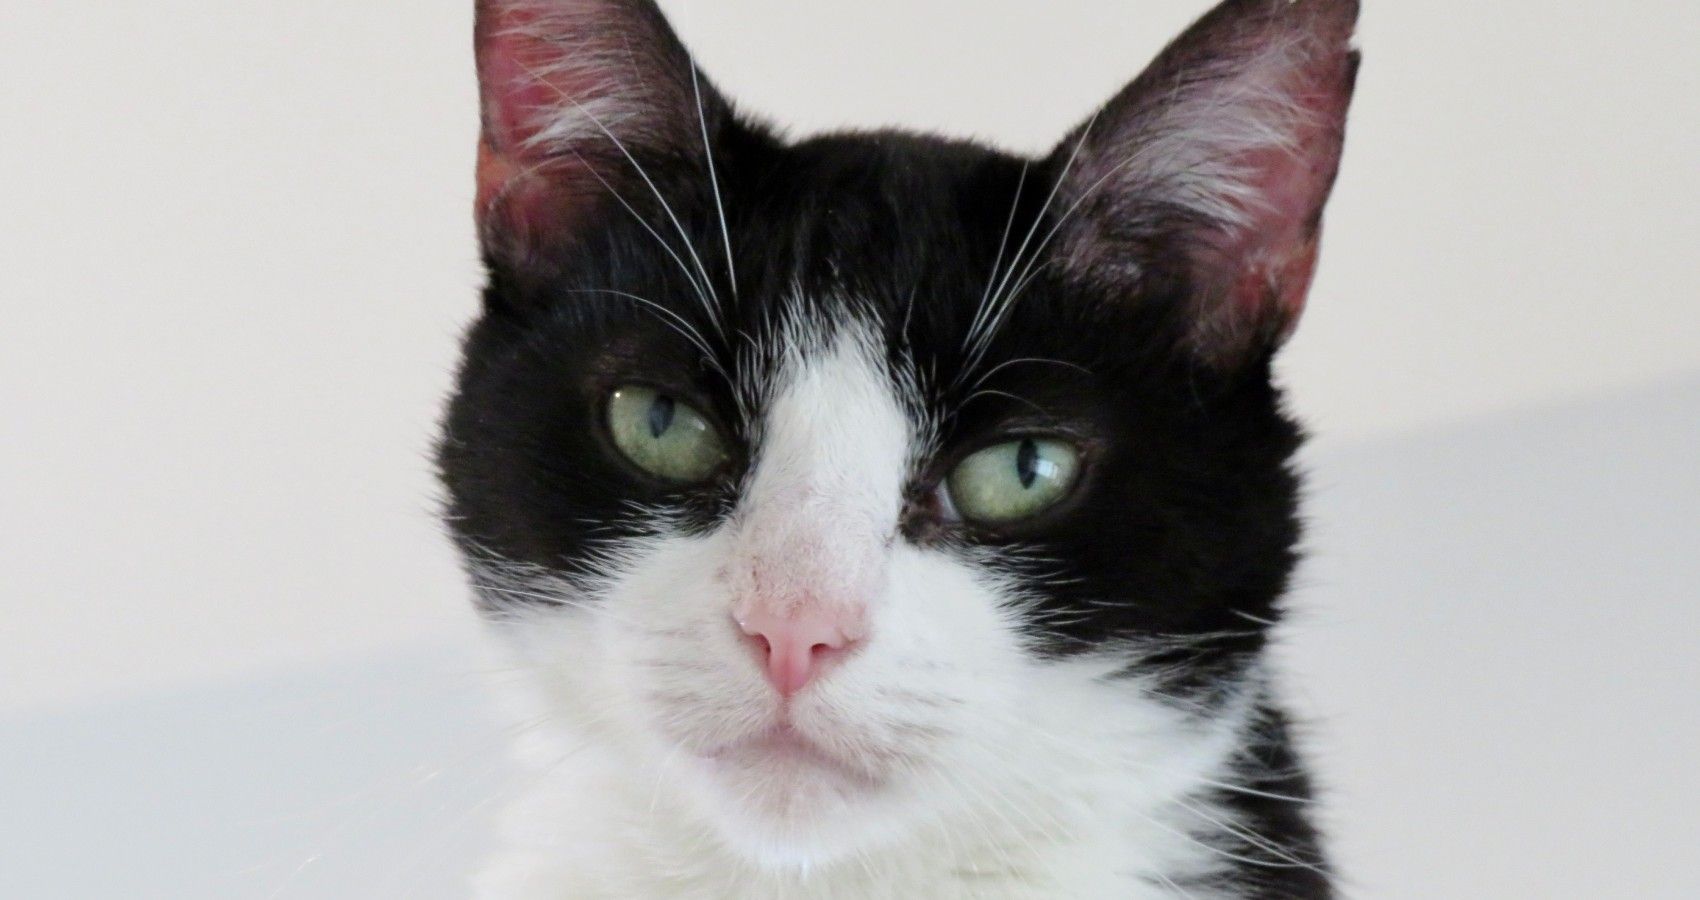 A Black And White Cat Looking At Camera